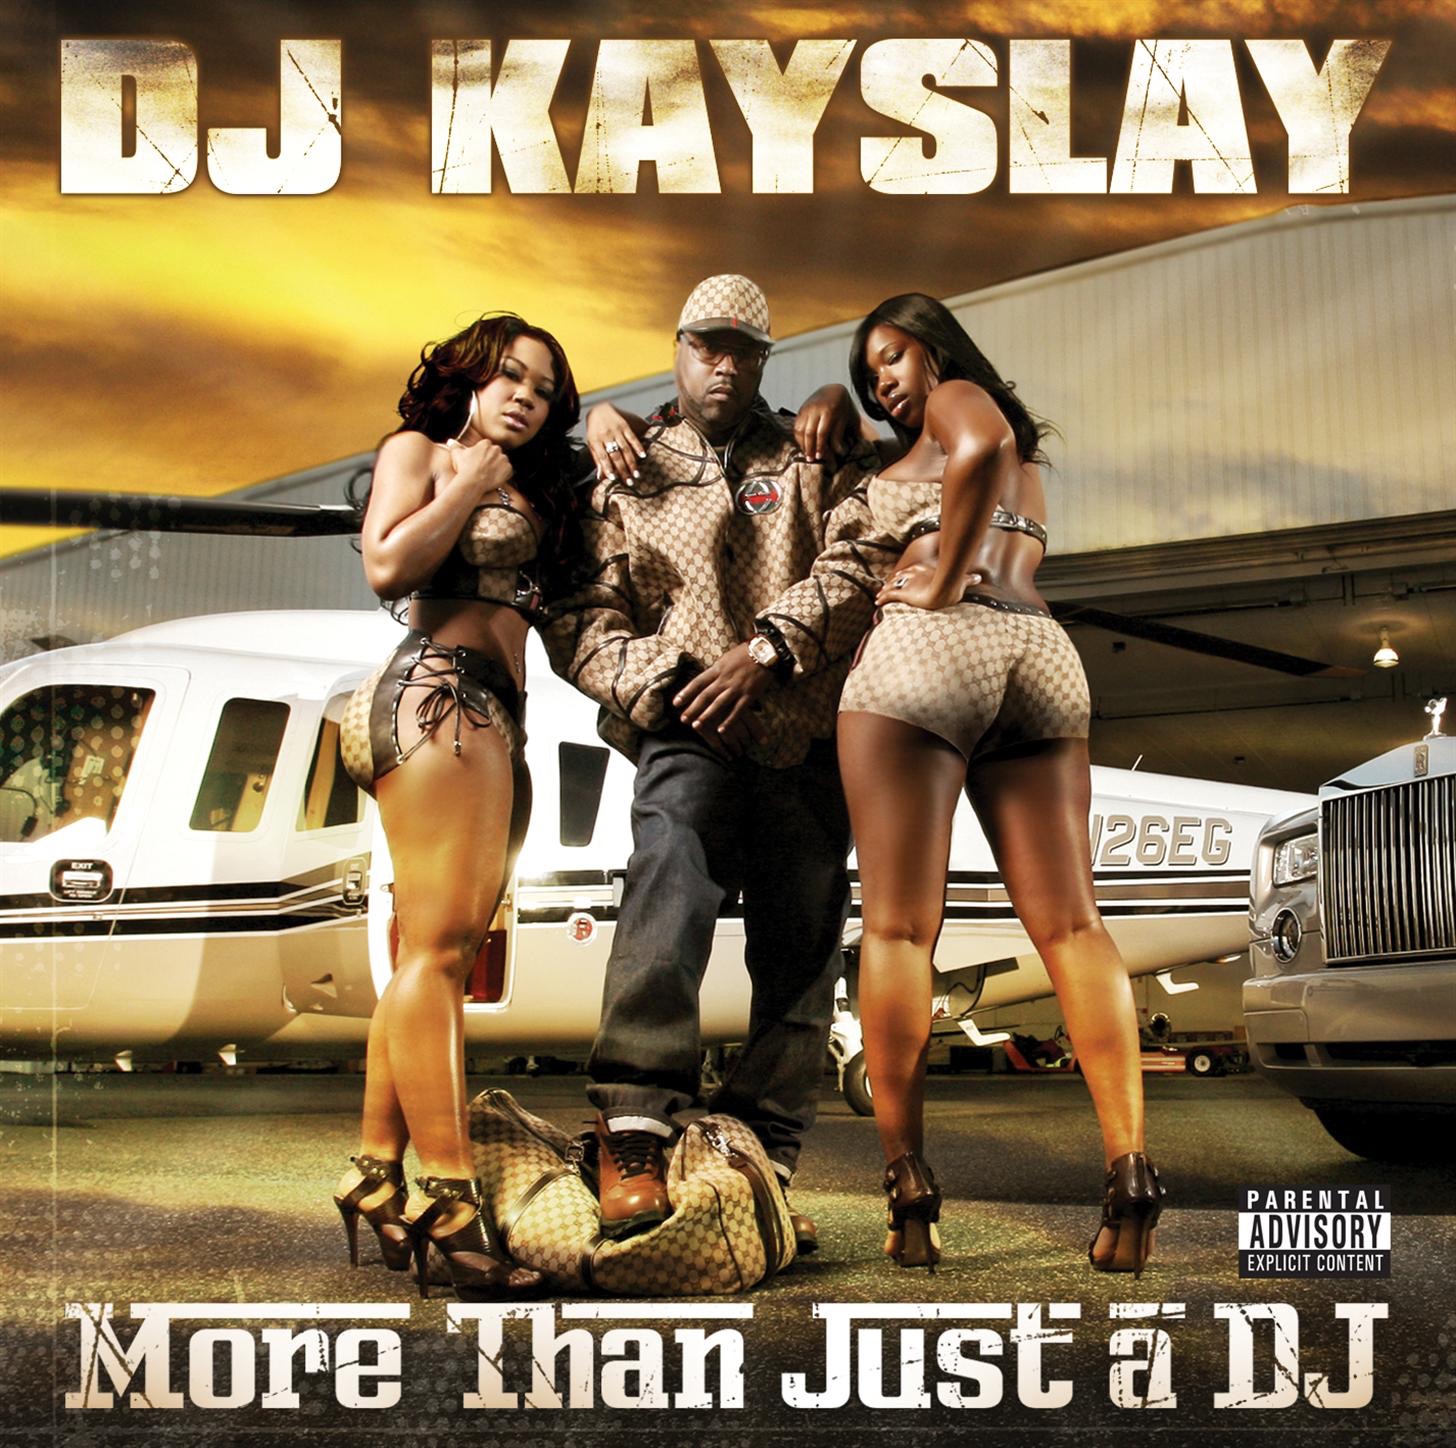 Art for More Than Just a DJ feat. Busta Rhymes by DJ Kay Slay